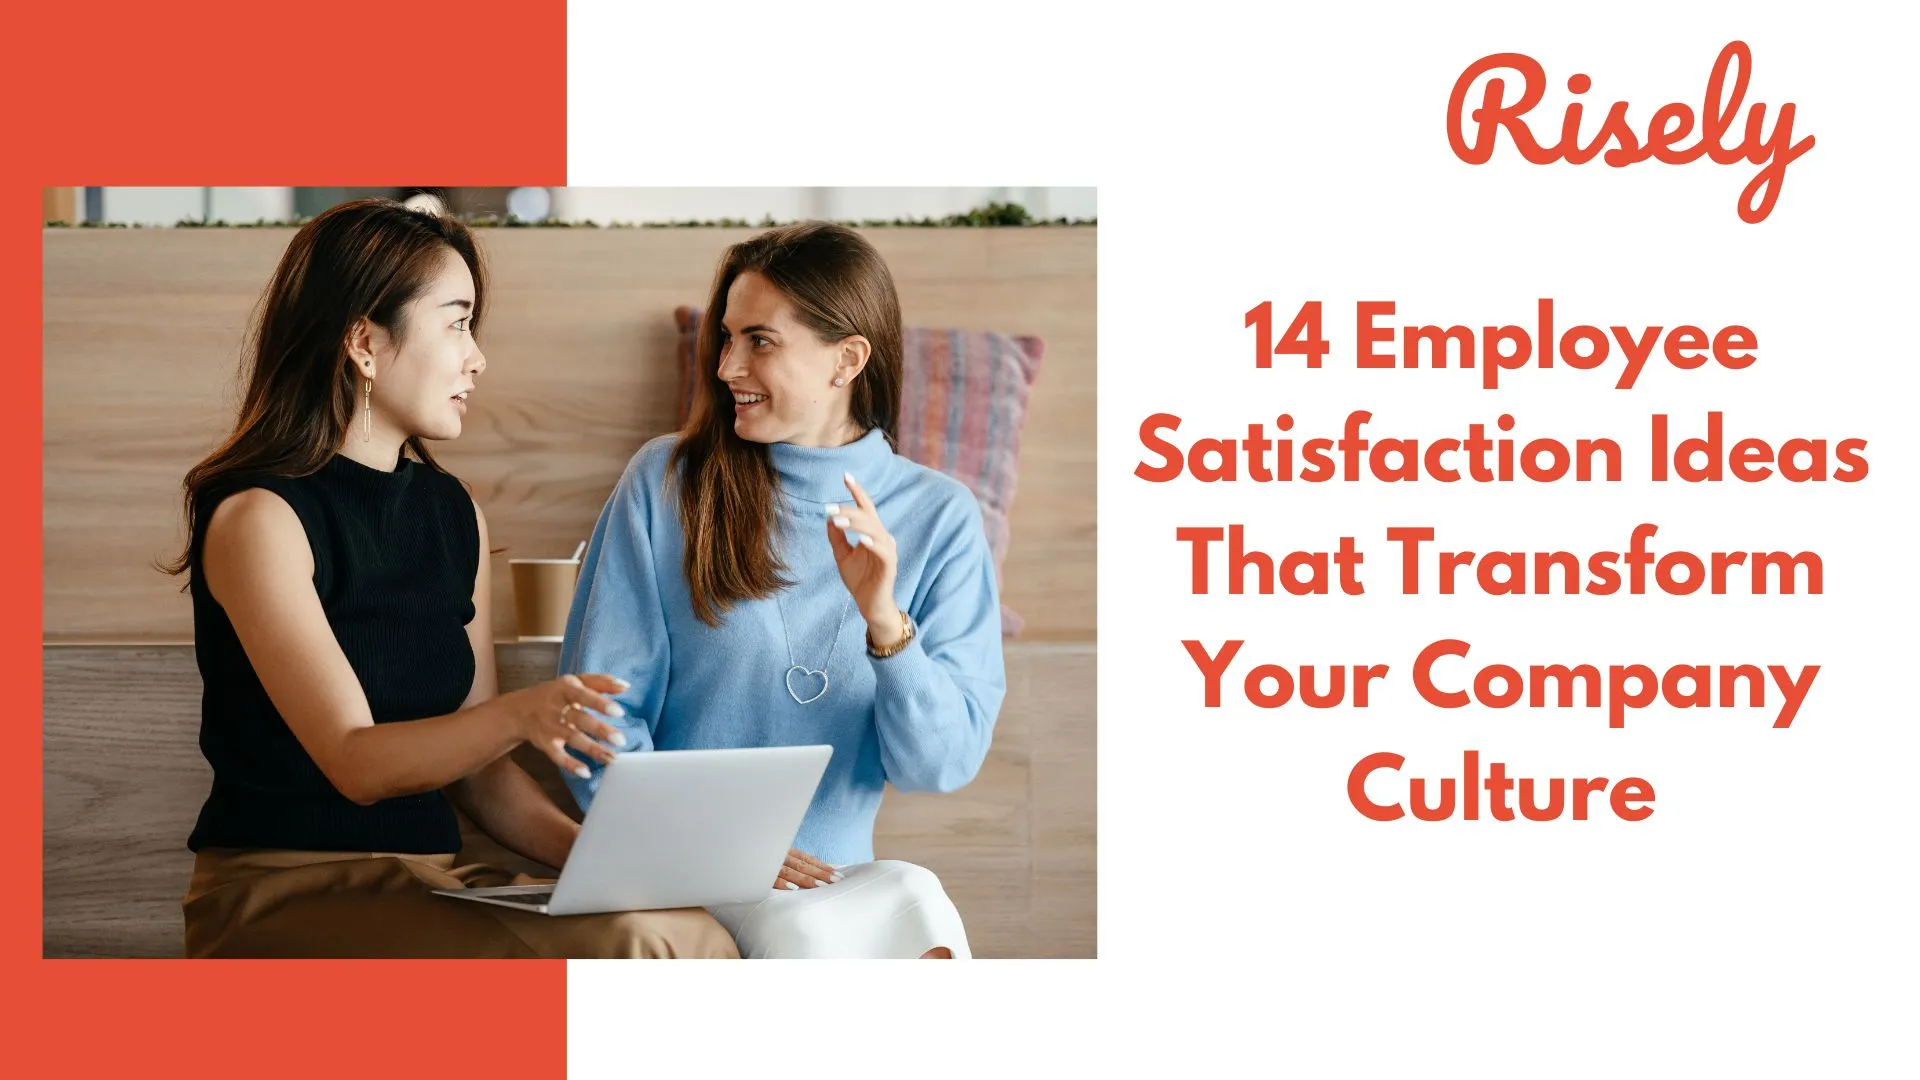 14 Employee Satisfaction Ideas That Transform Your Company Culture